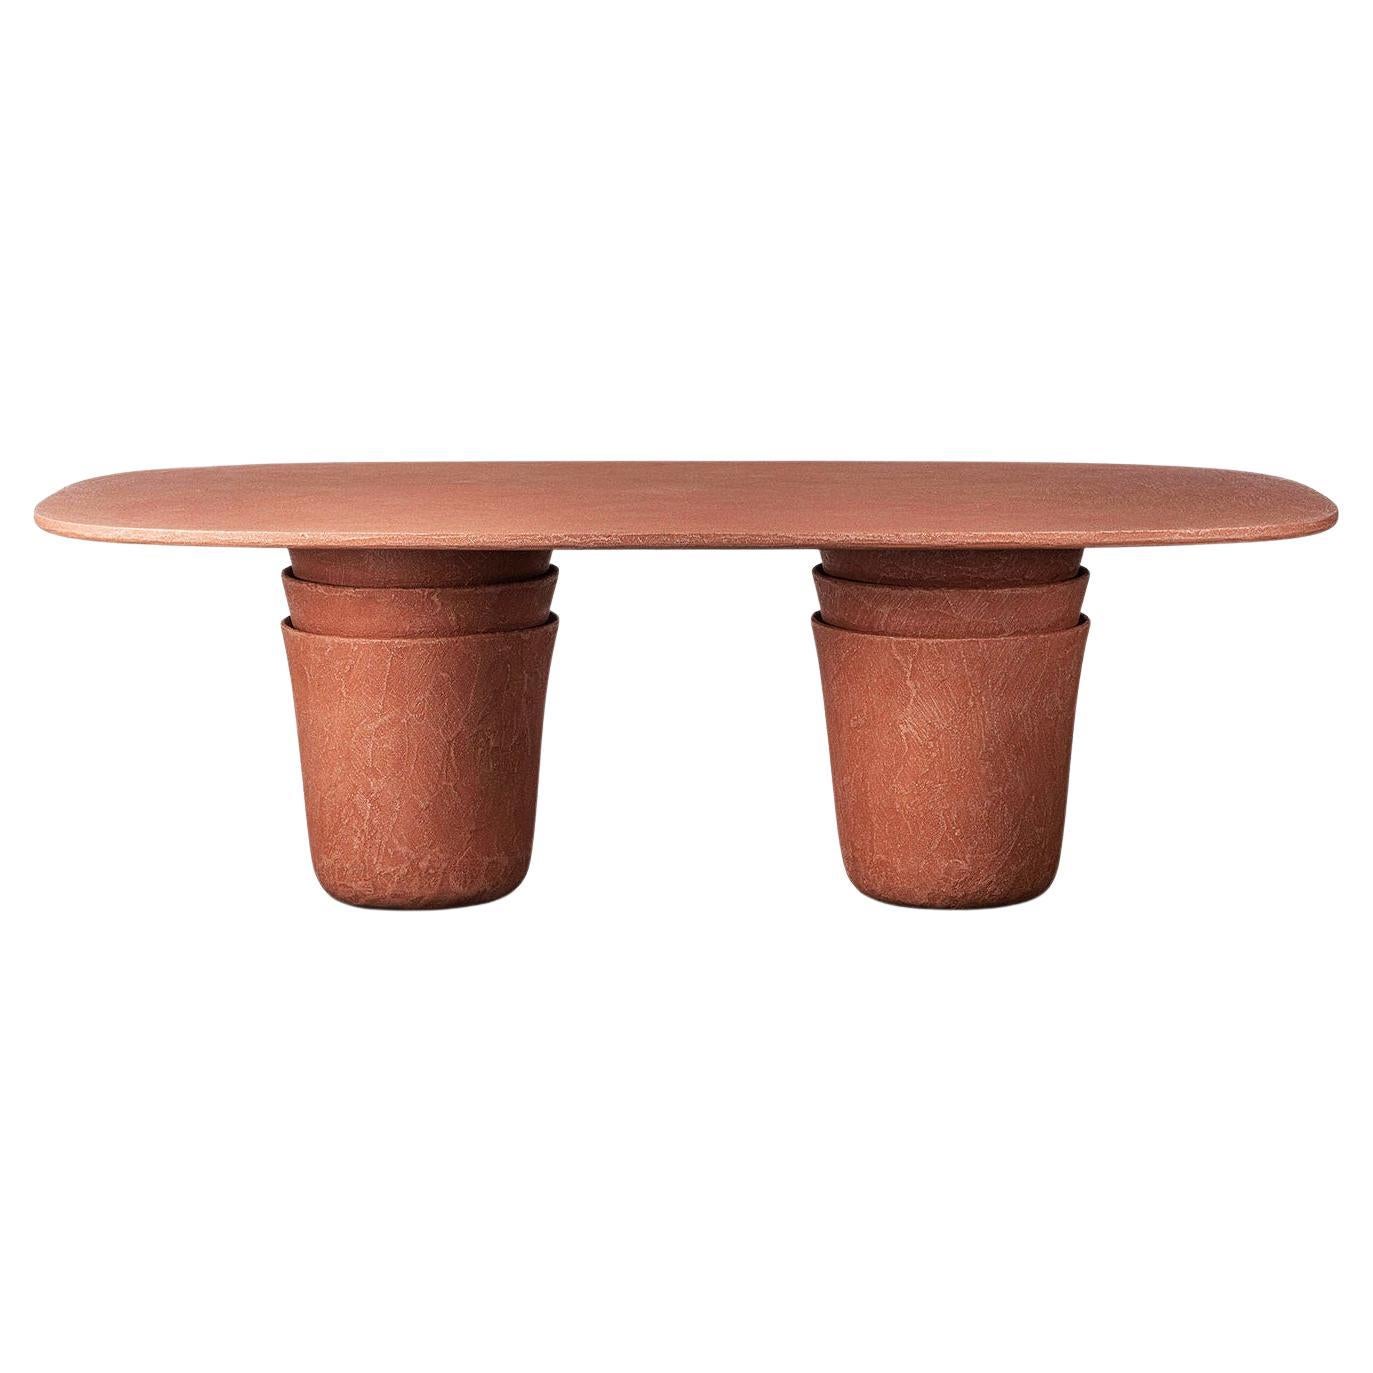 Vick Coral Large Outdoor Table